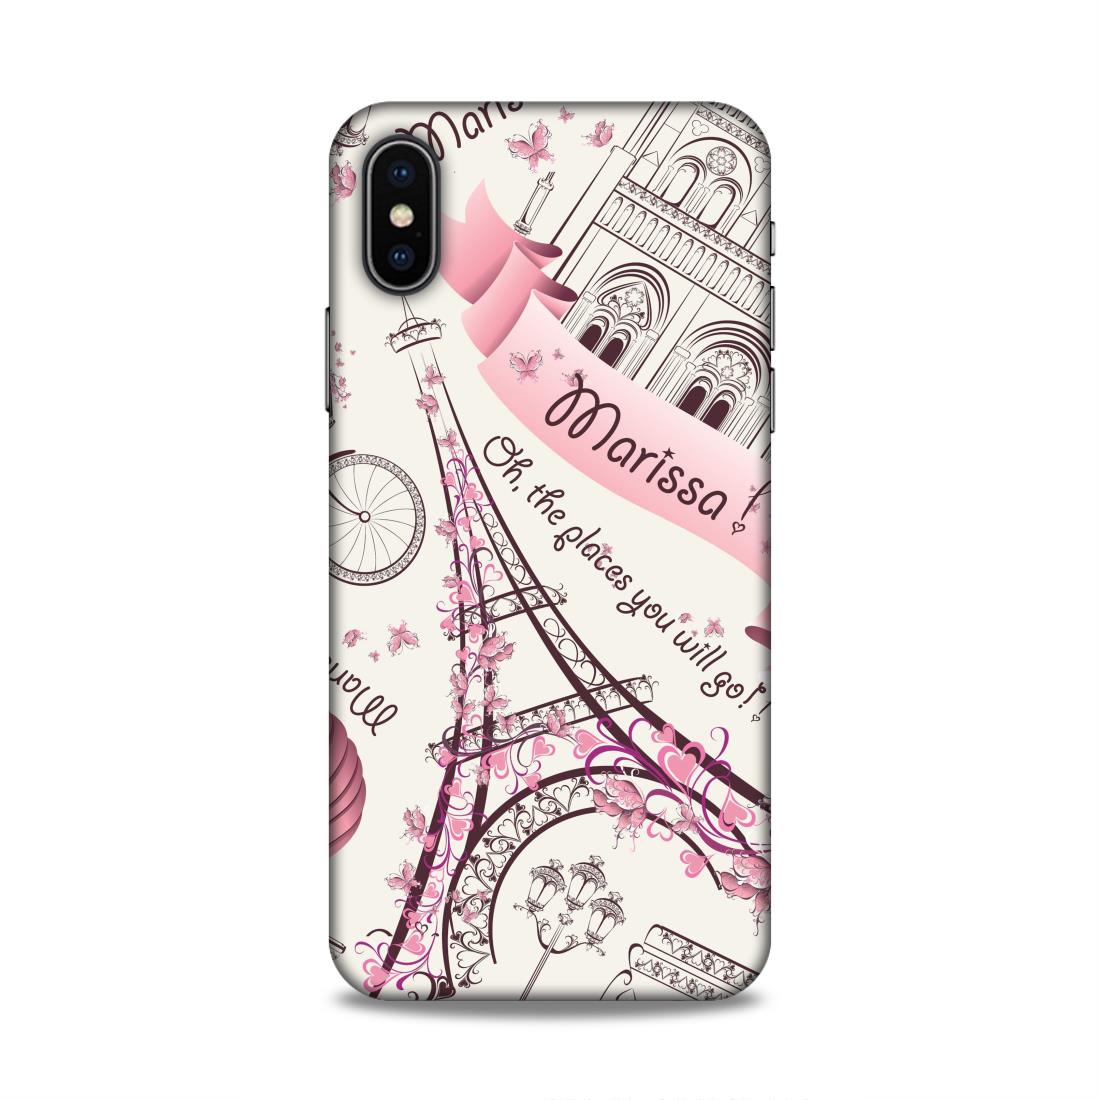 Love Efile Tower Hard Back Case For Apple iPhone X/XS